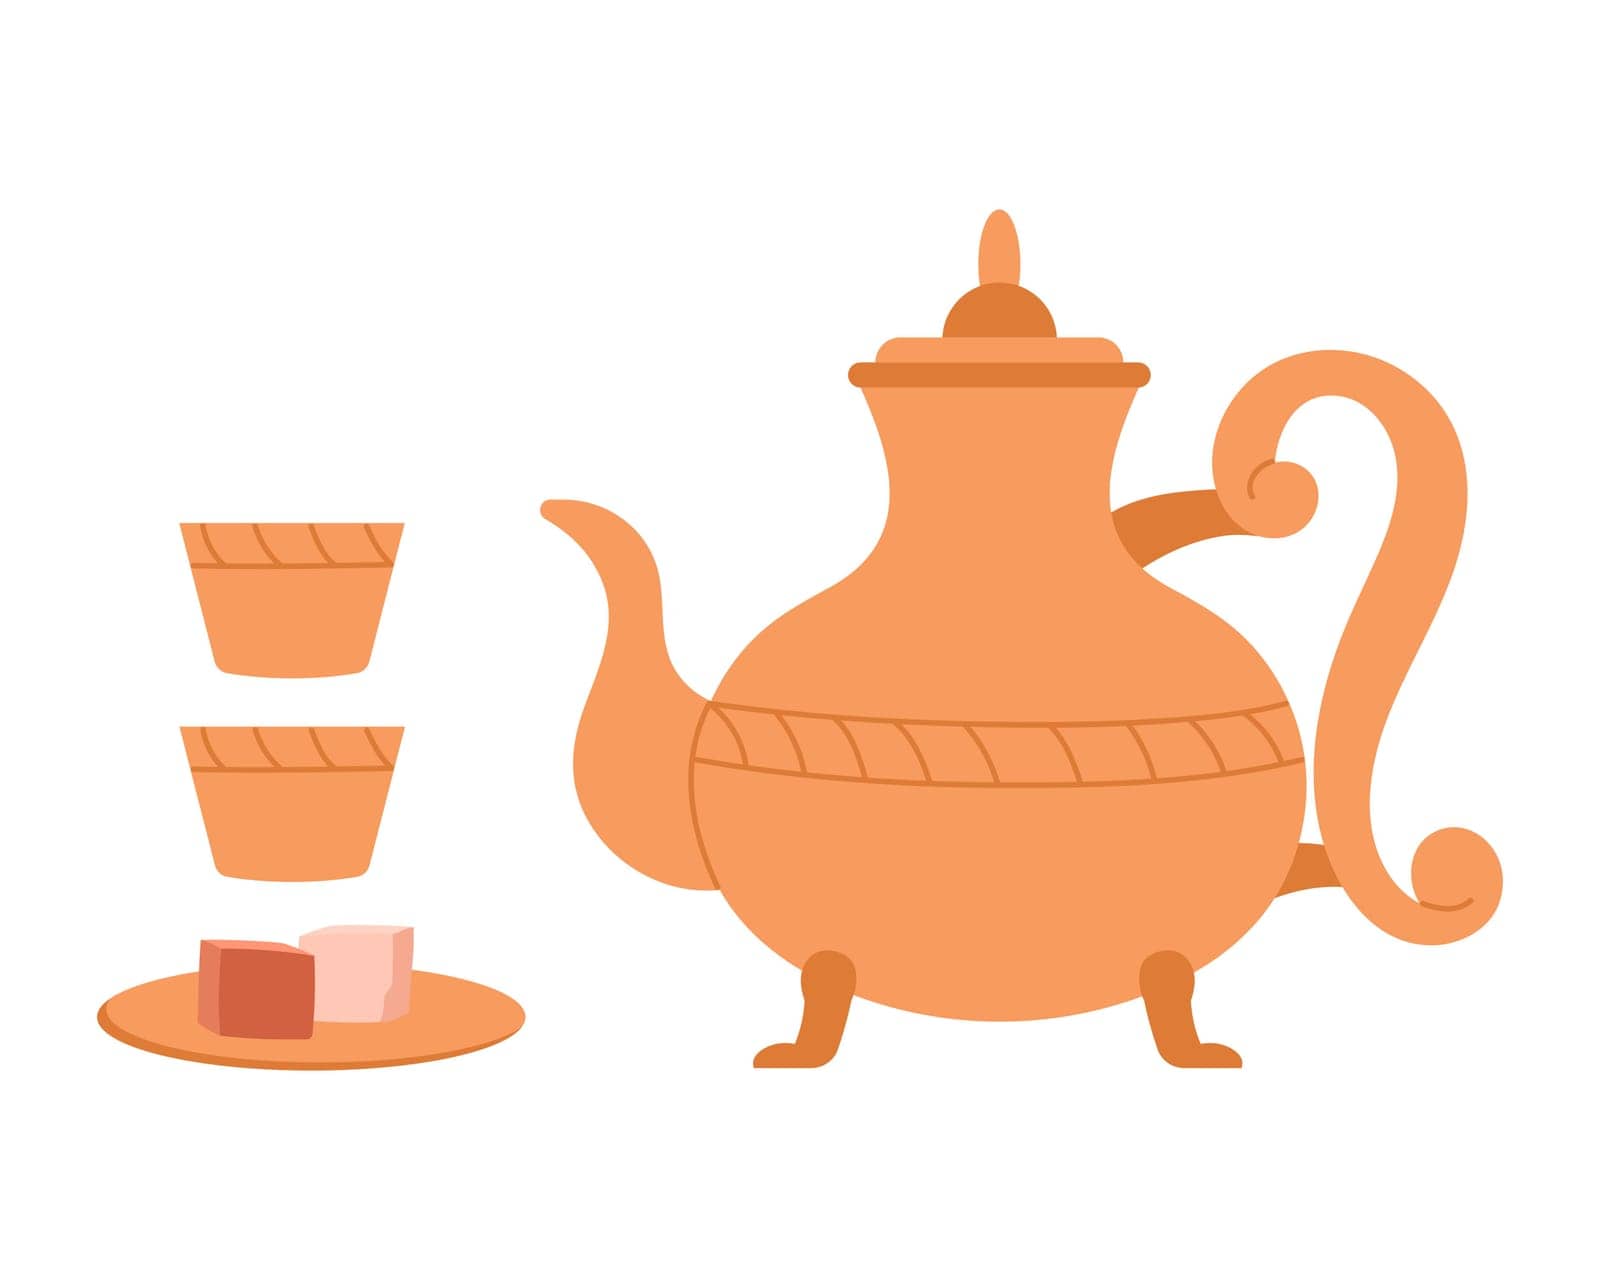 Traditional moroccan teapot by Popov